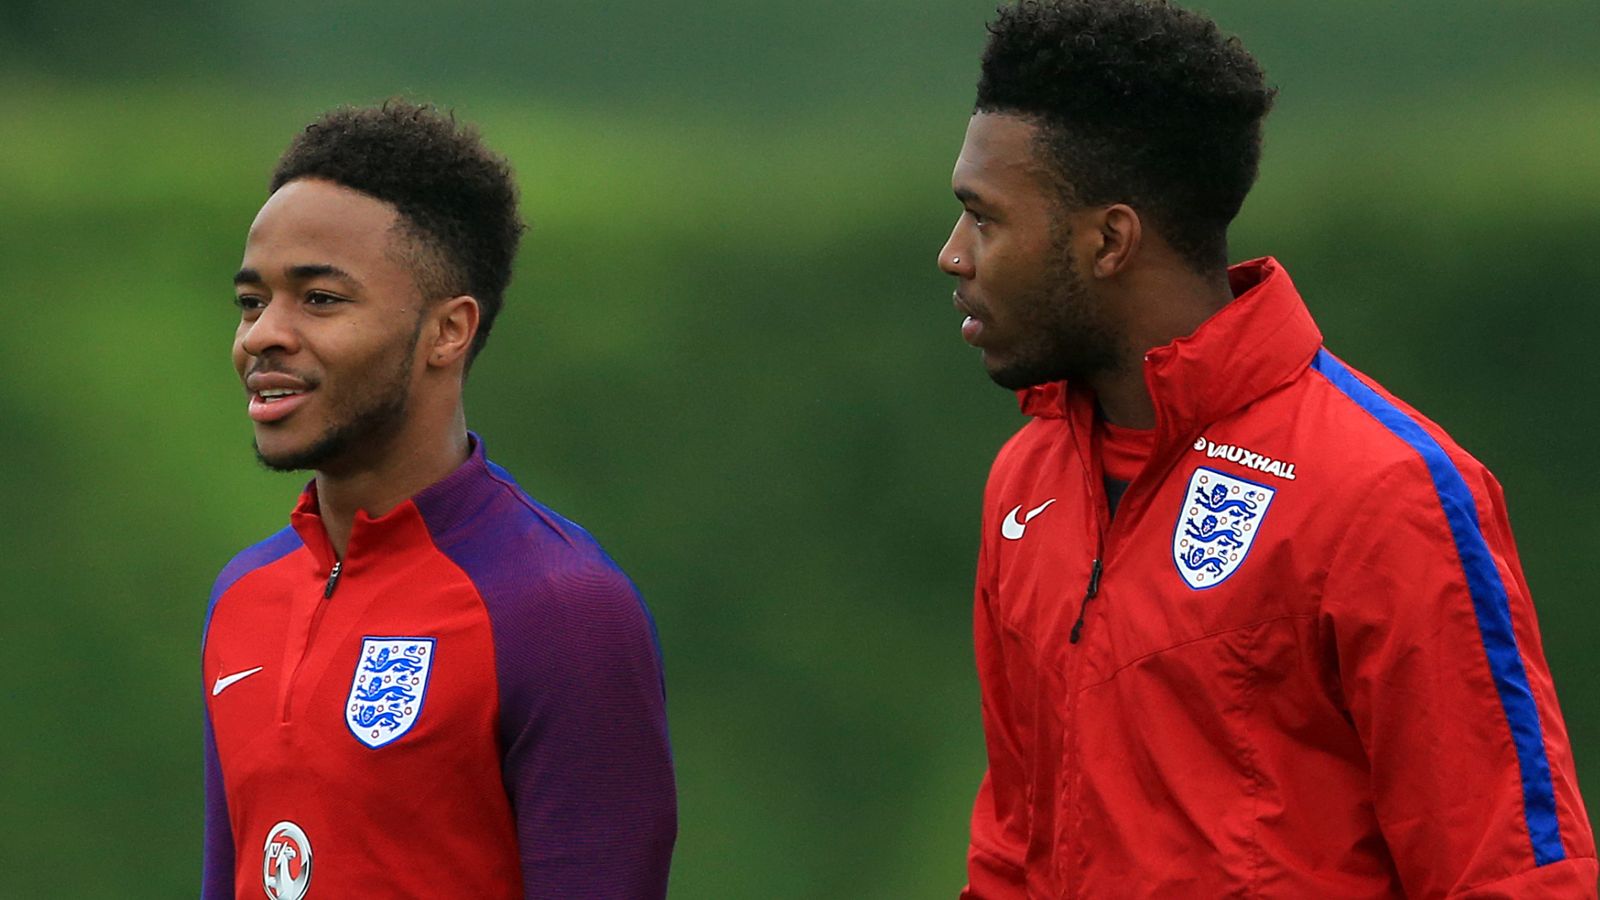 Raheem Sterling is one of the world's best players, says former Liverpool and England team-mate Daniel Sturridge